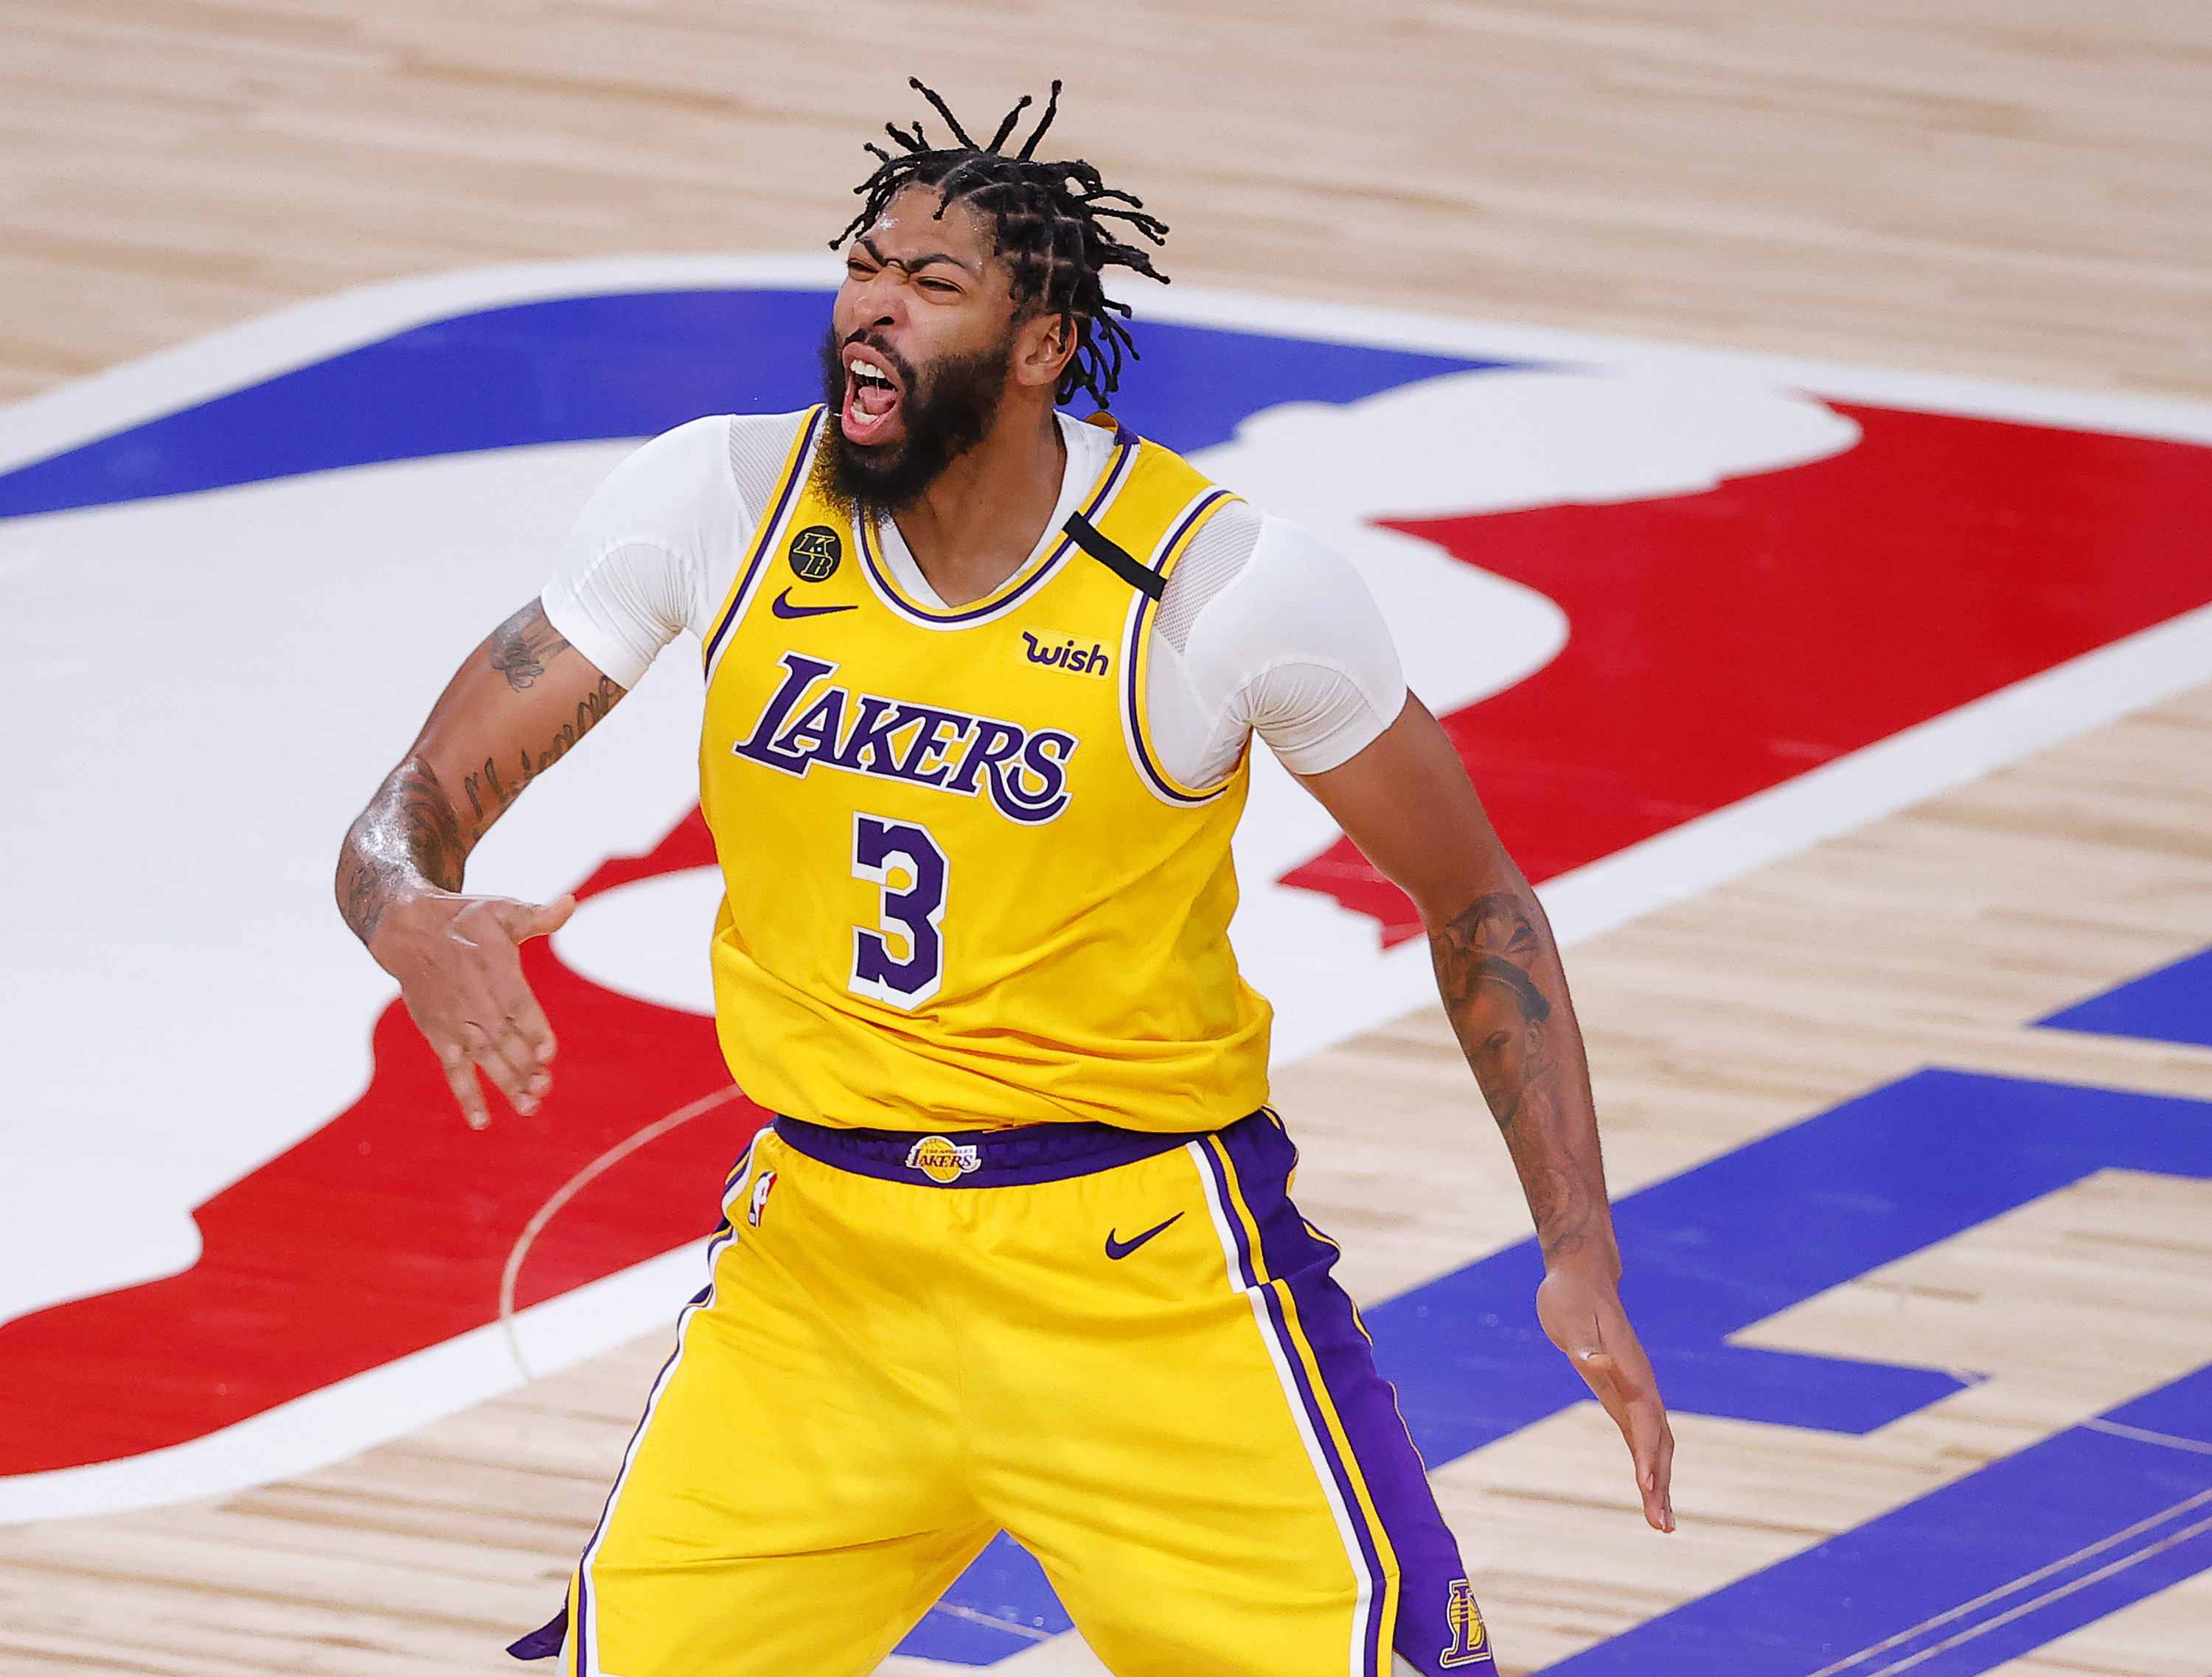 Yellow Laker jersey with purple lettering